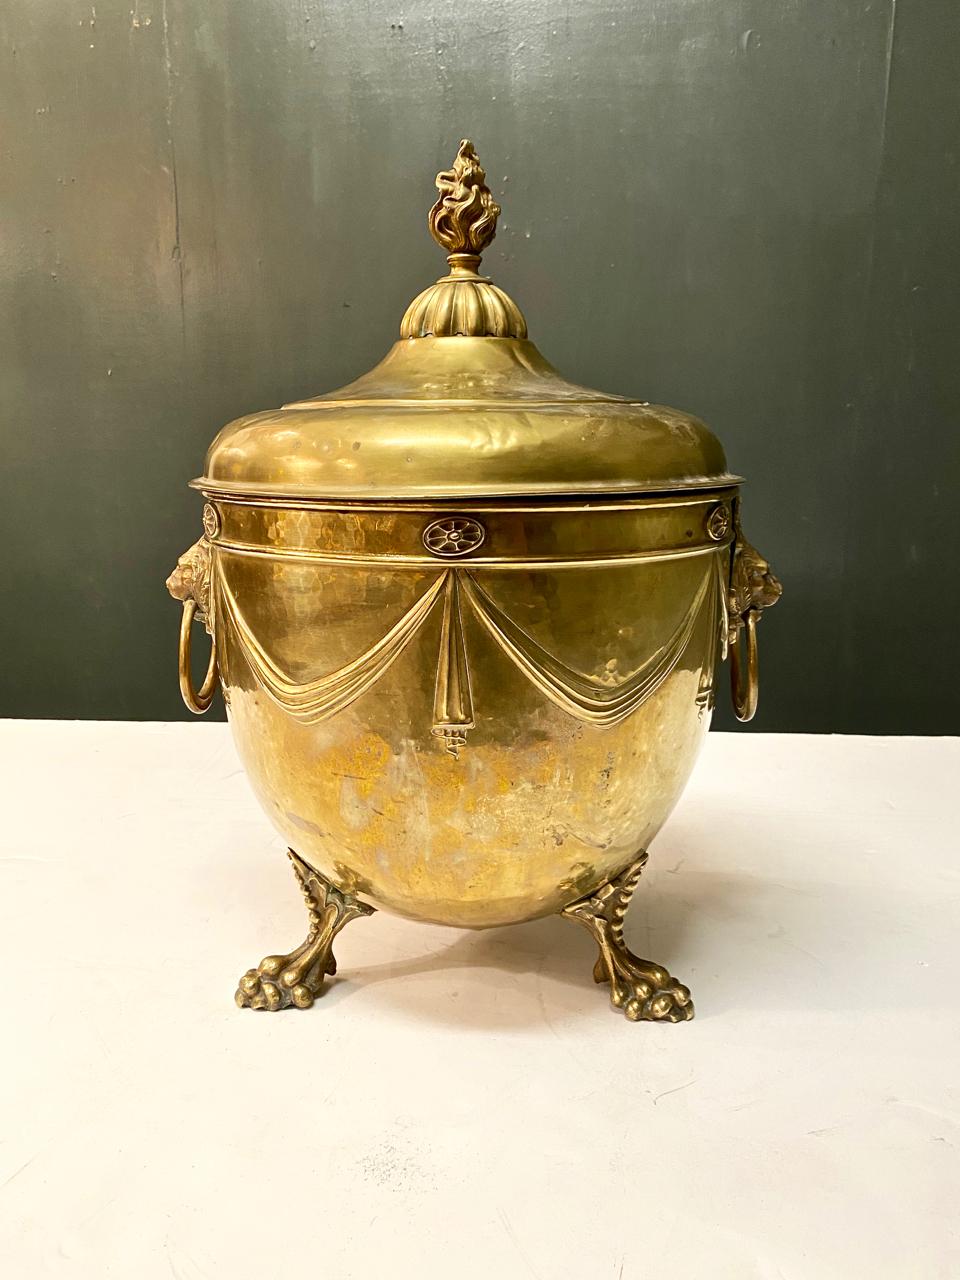 This is a superb example of a brass Regency Purdonium or coal scuttle that dates to c. 1800-1825. The base features highly detailed cast brass lion-head handles and chiseled articulated lion paw feet. The vessel is surrounded by neoclassical drapery